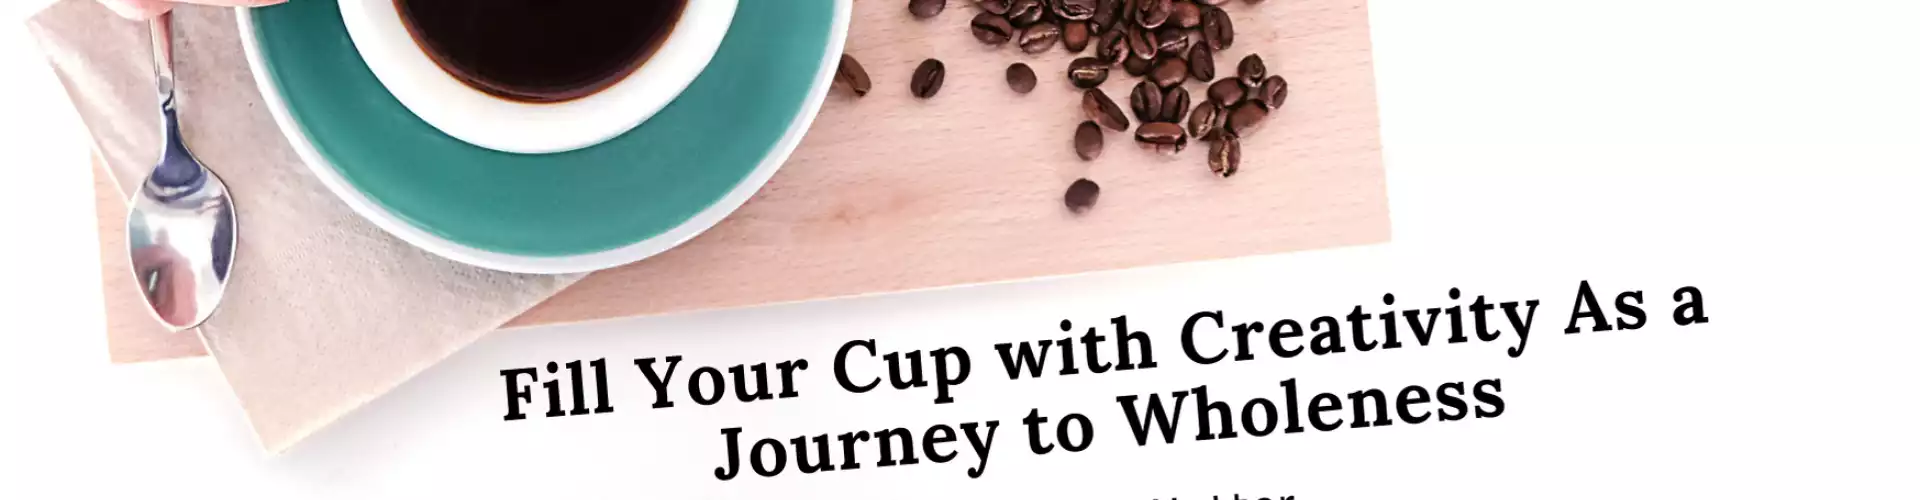 Fill Your Cup with Creativity As a Journey to Wholeness